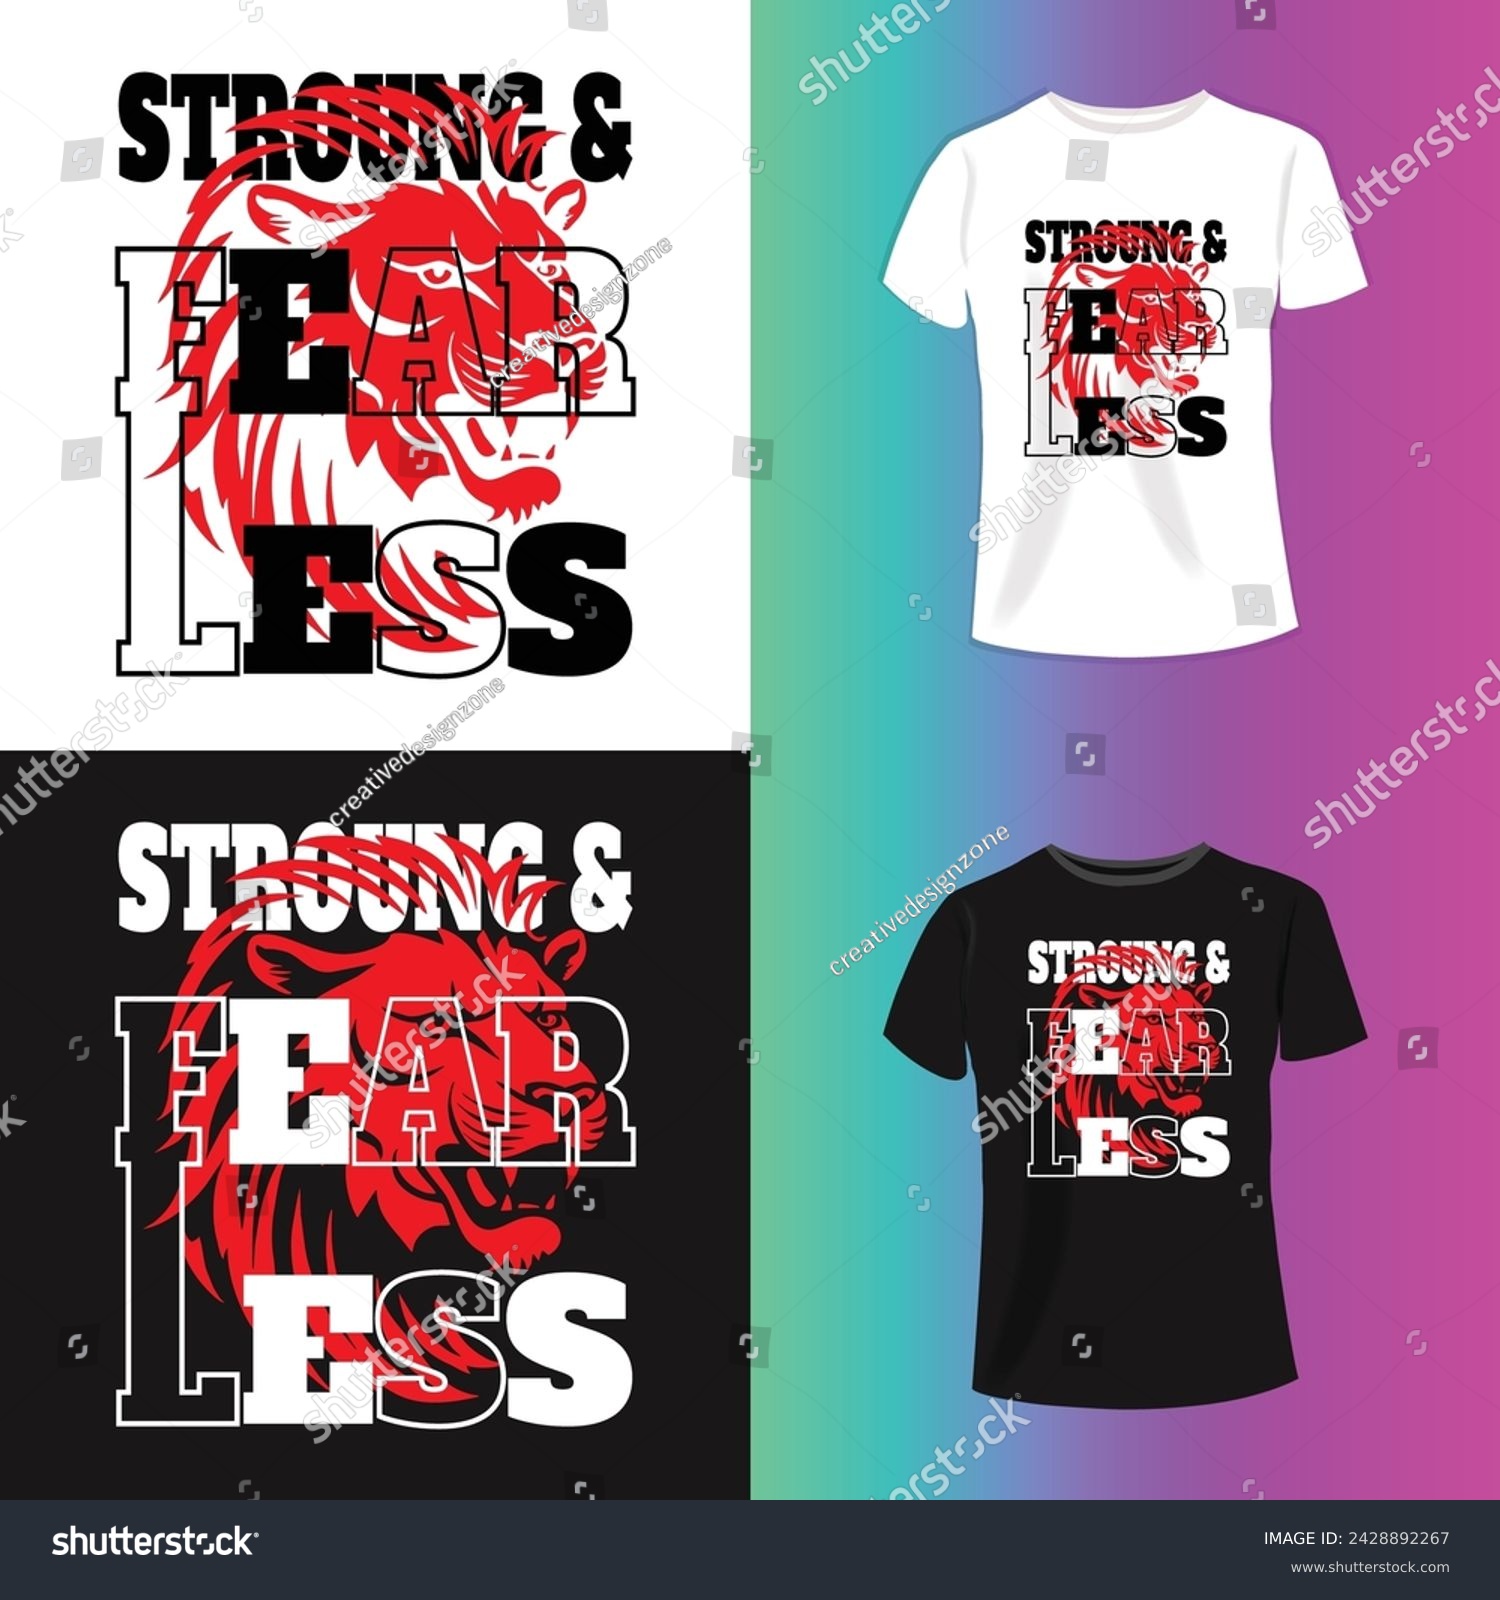 SVG of Strong fear less with a lion template for business or t-shirt design. svg